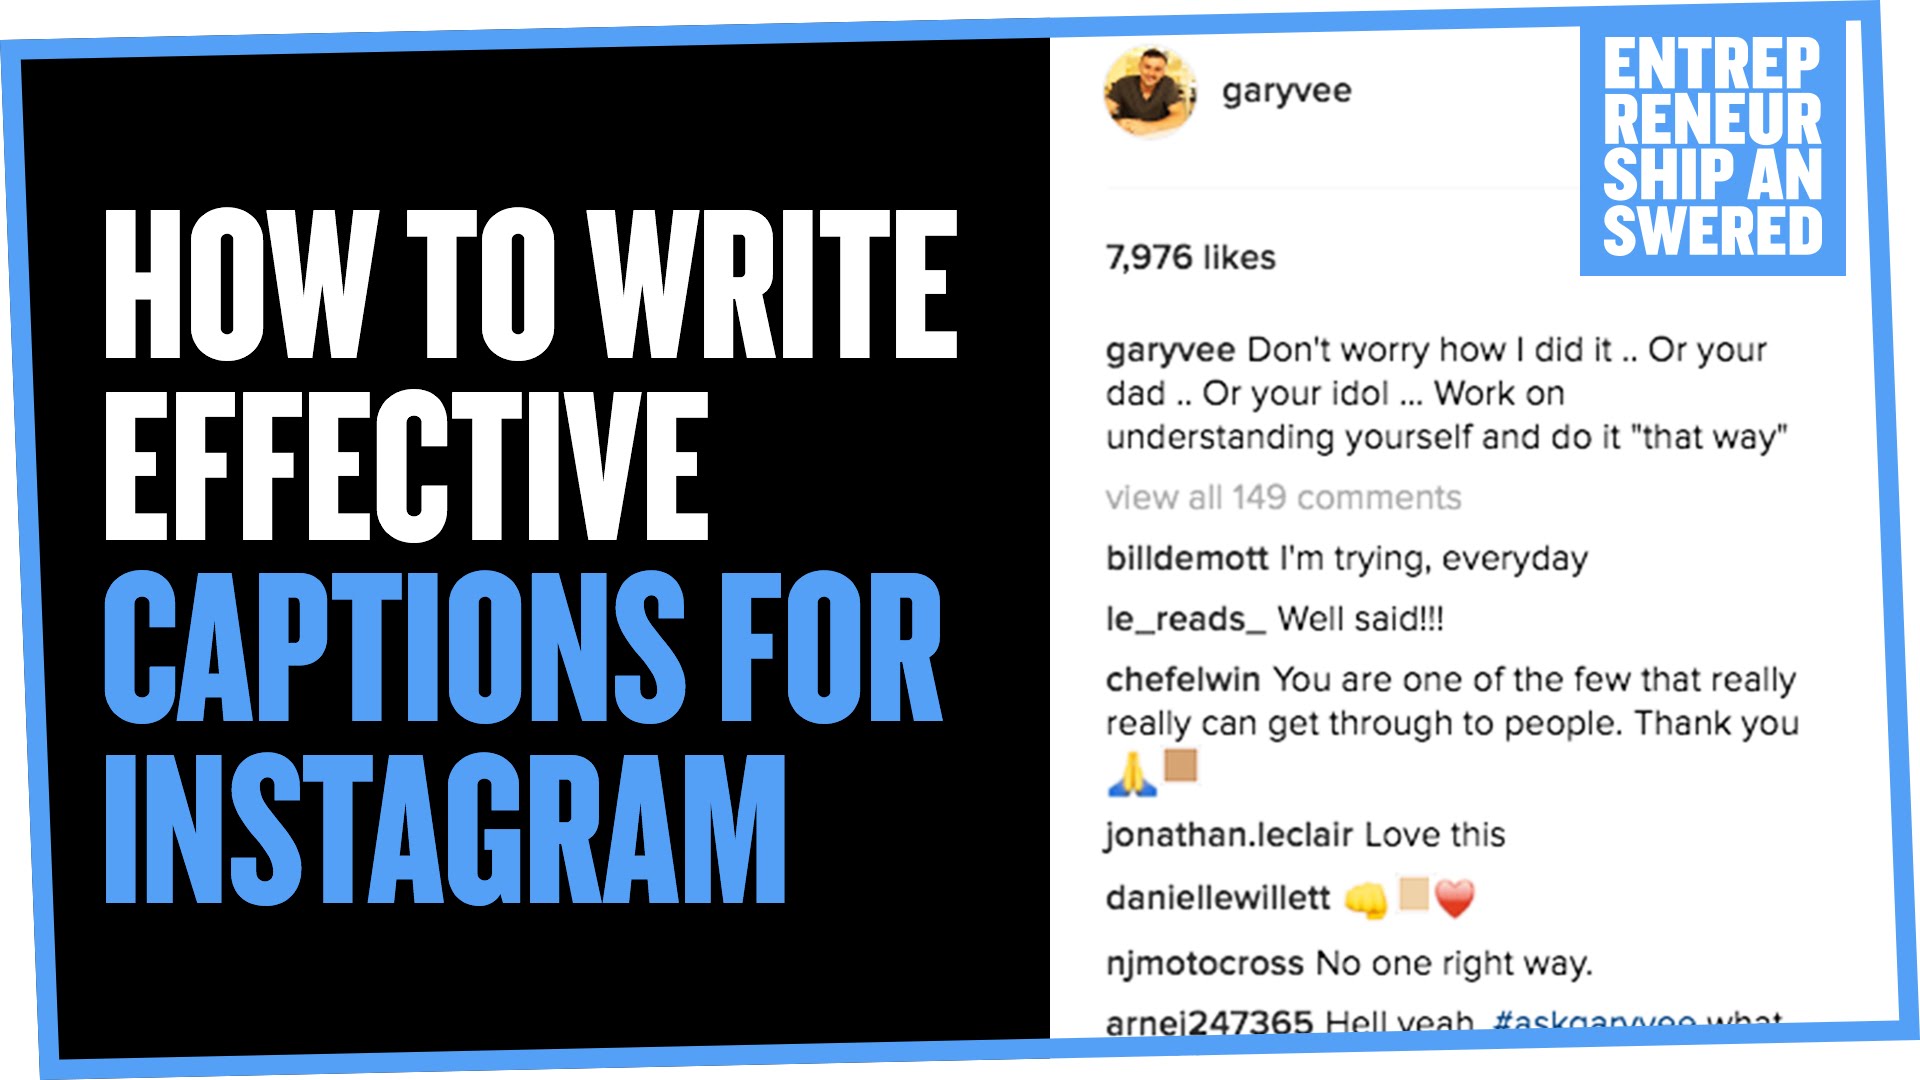 How to Write Effective Captions For Instagram - YouTube